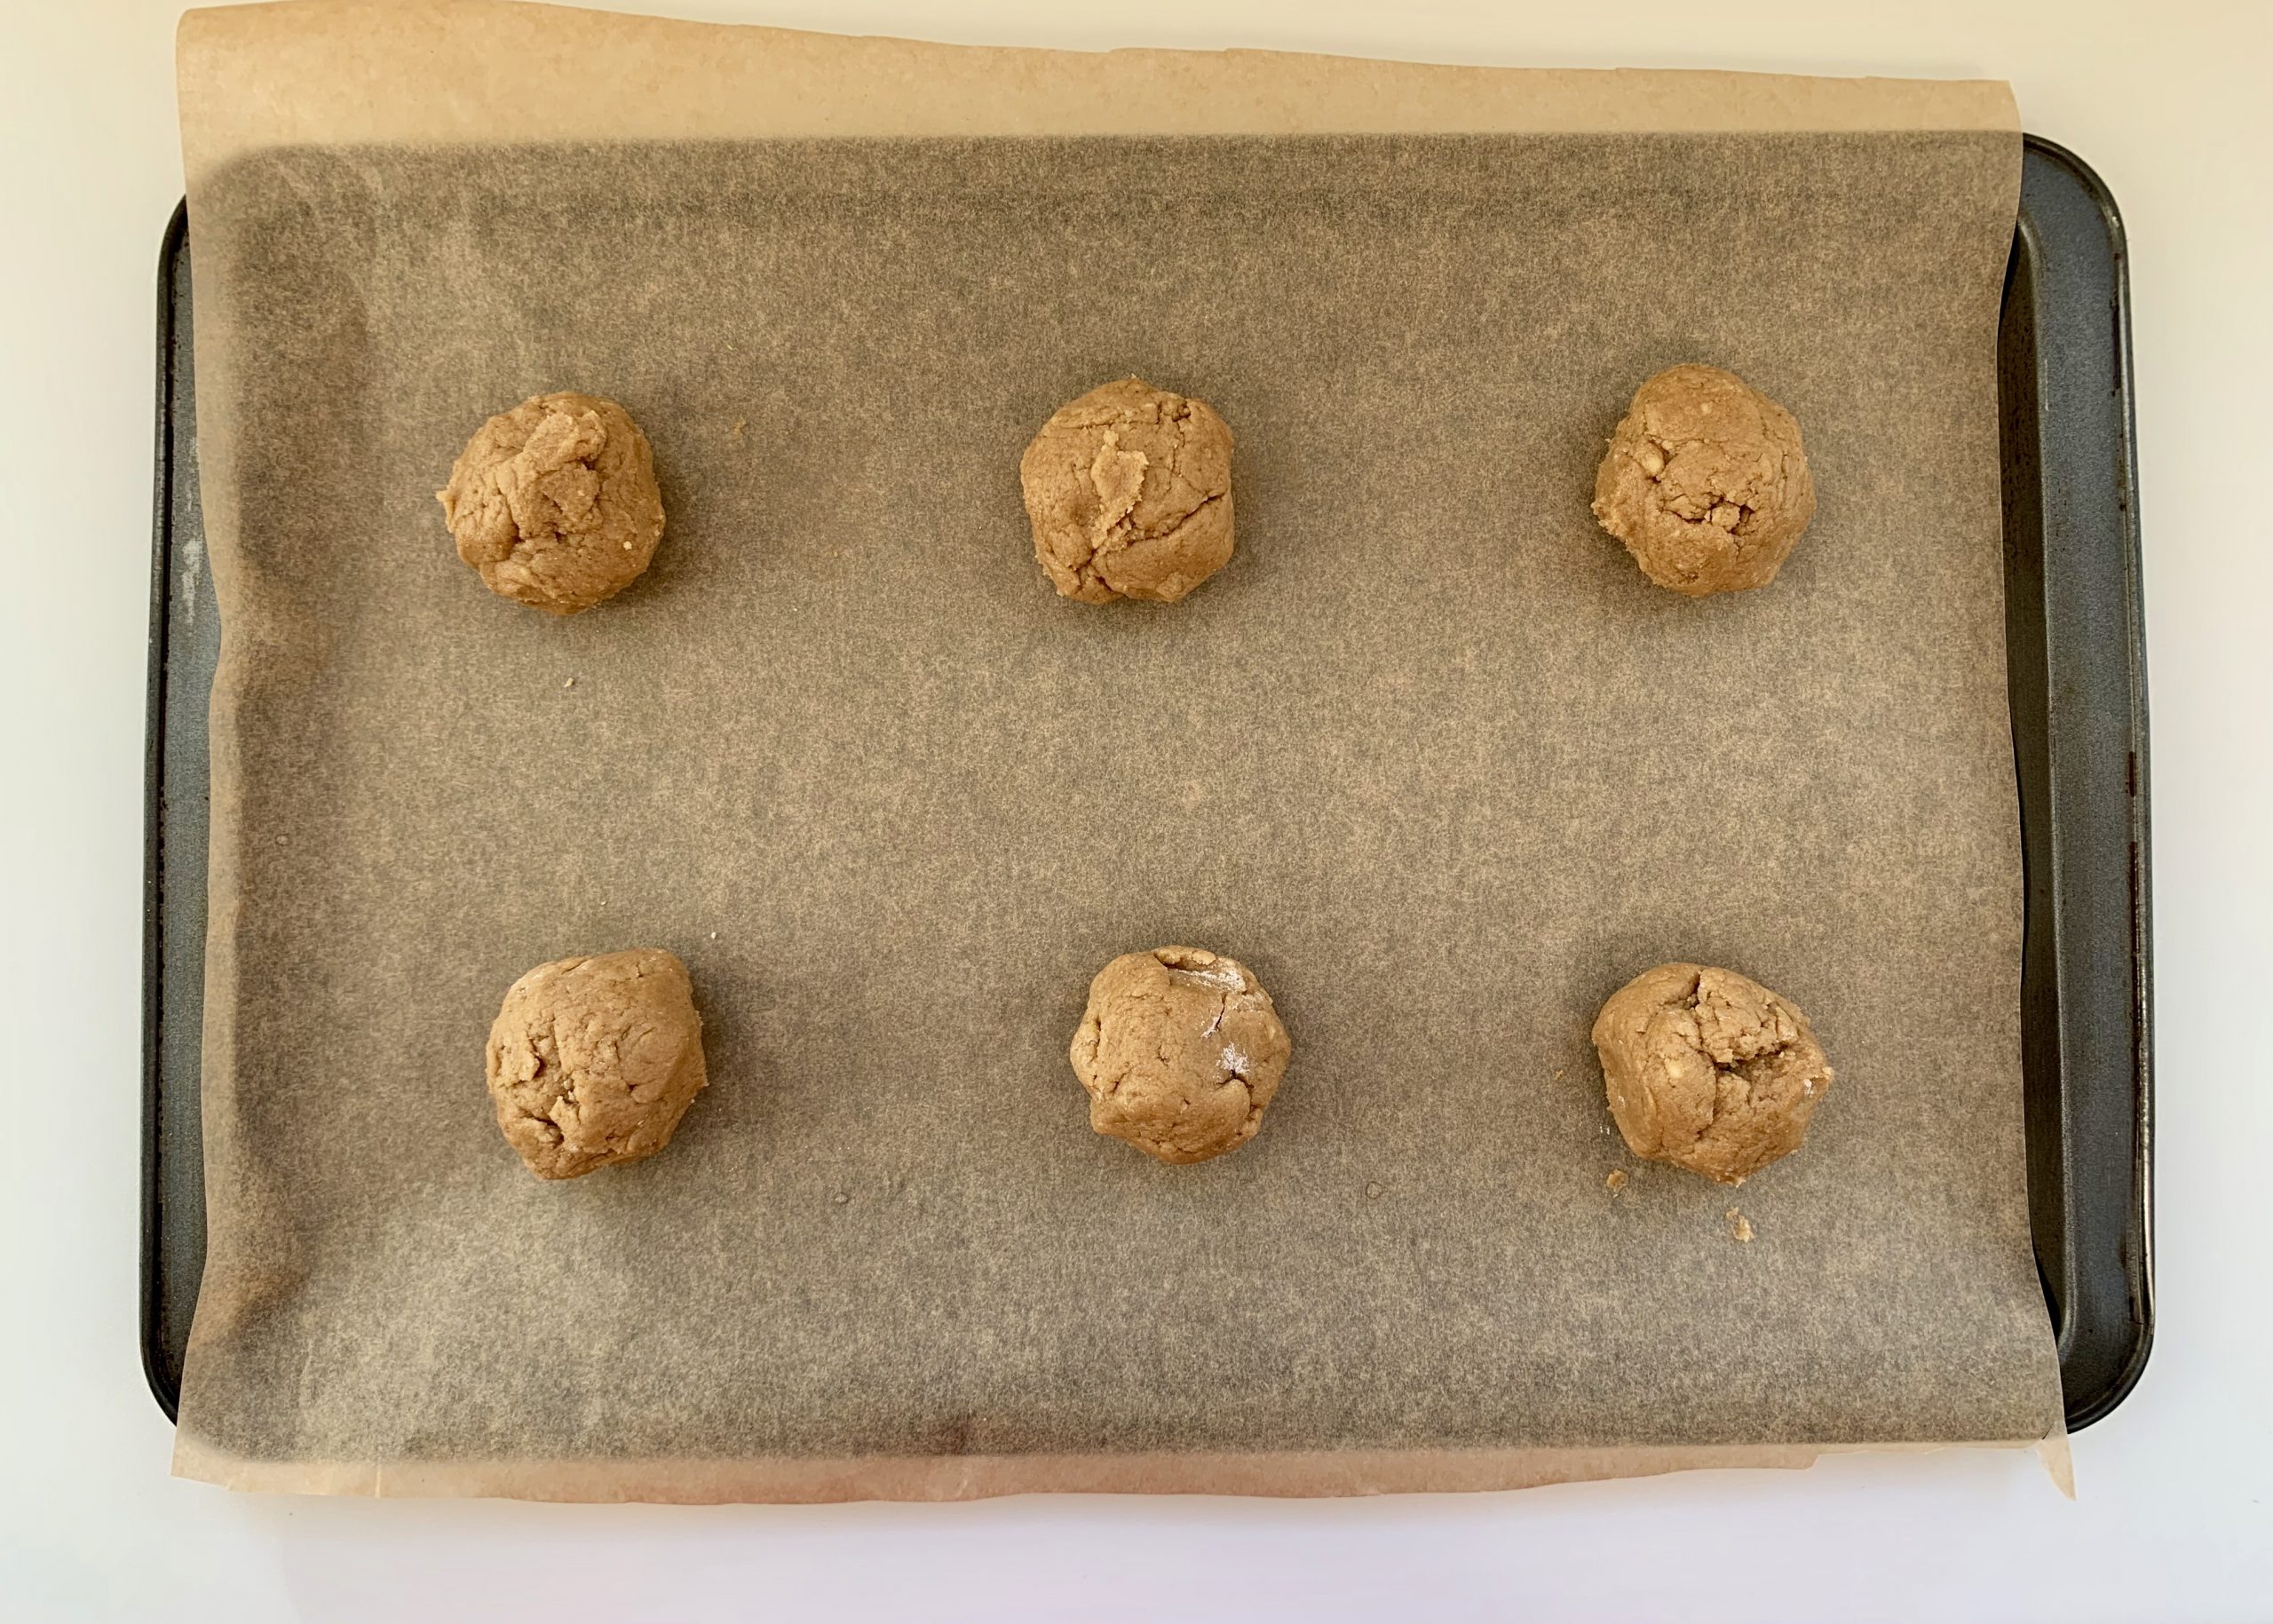 Balls of gluten free ginger biscuit dough on a tray